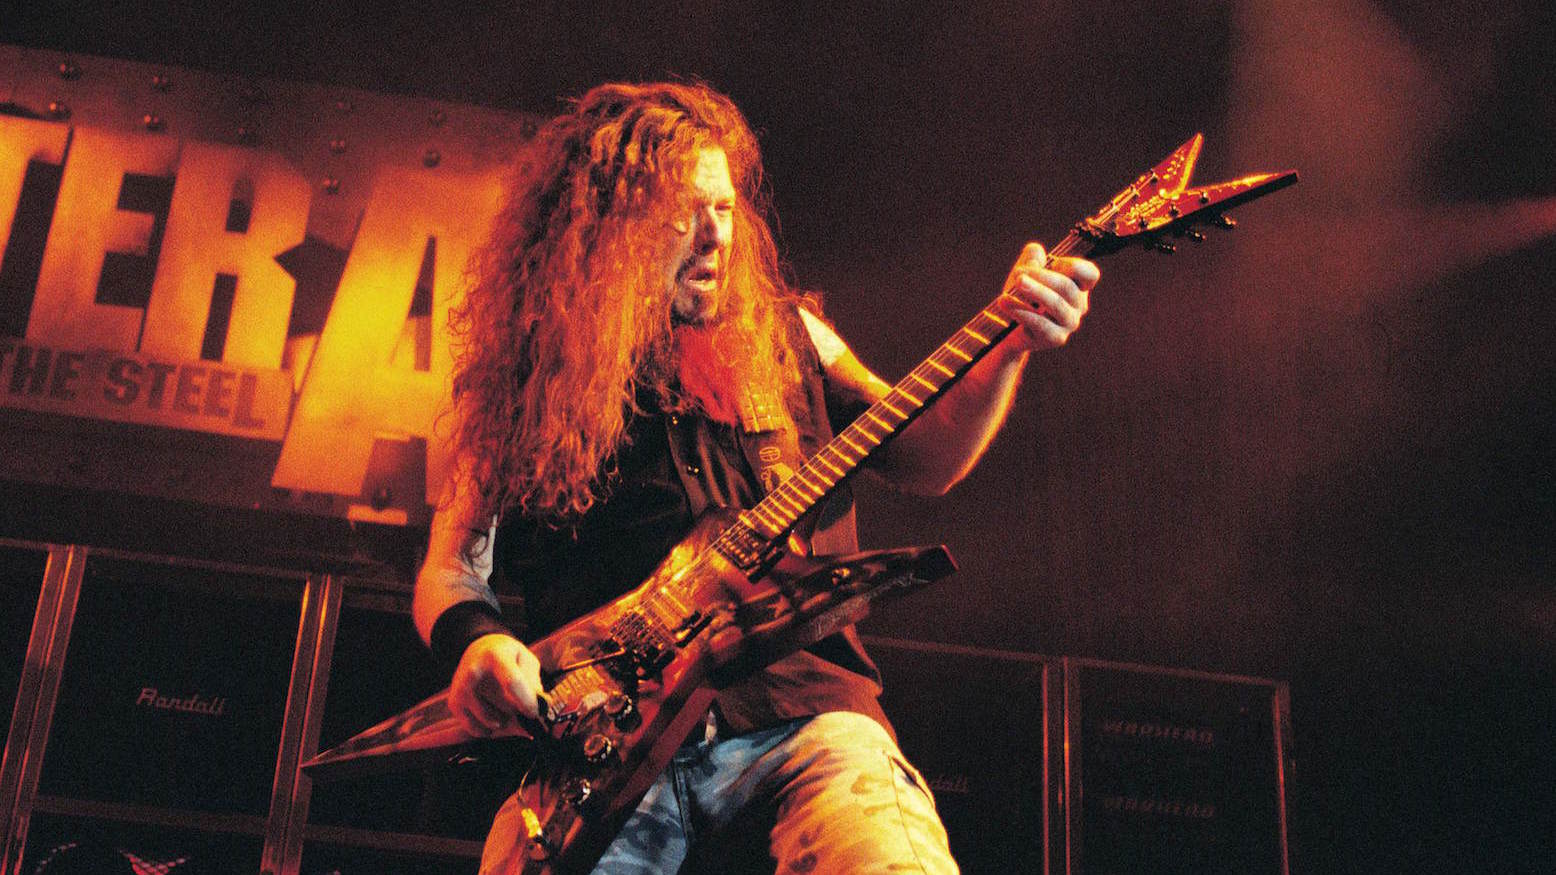 10 Things You Didn't Know About 'Dimebag' Darrell Abbott